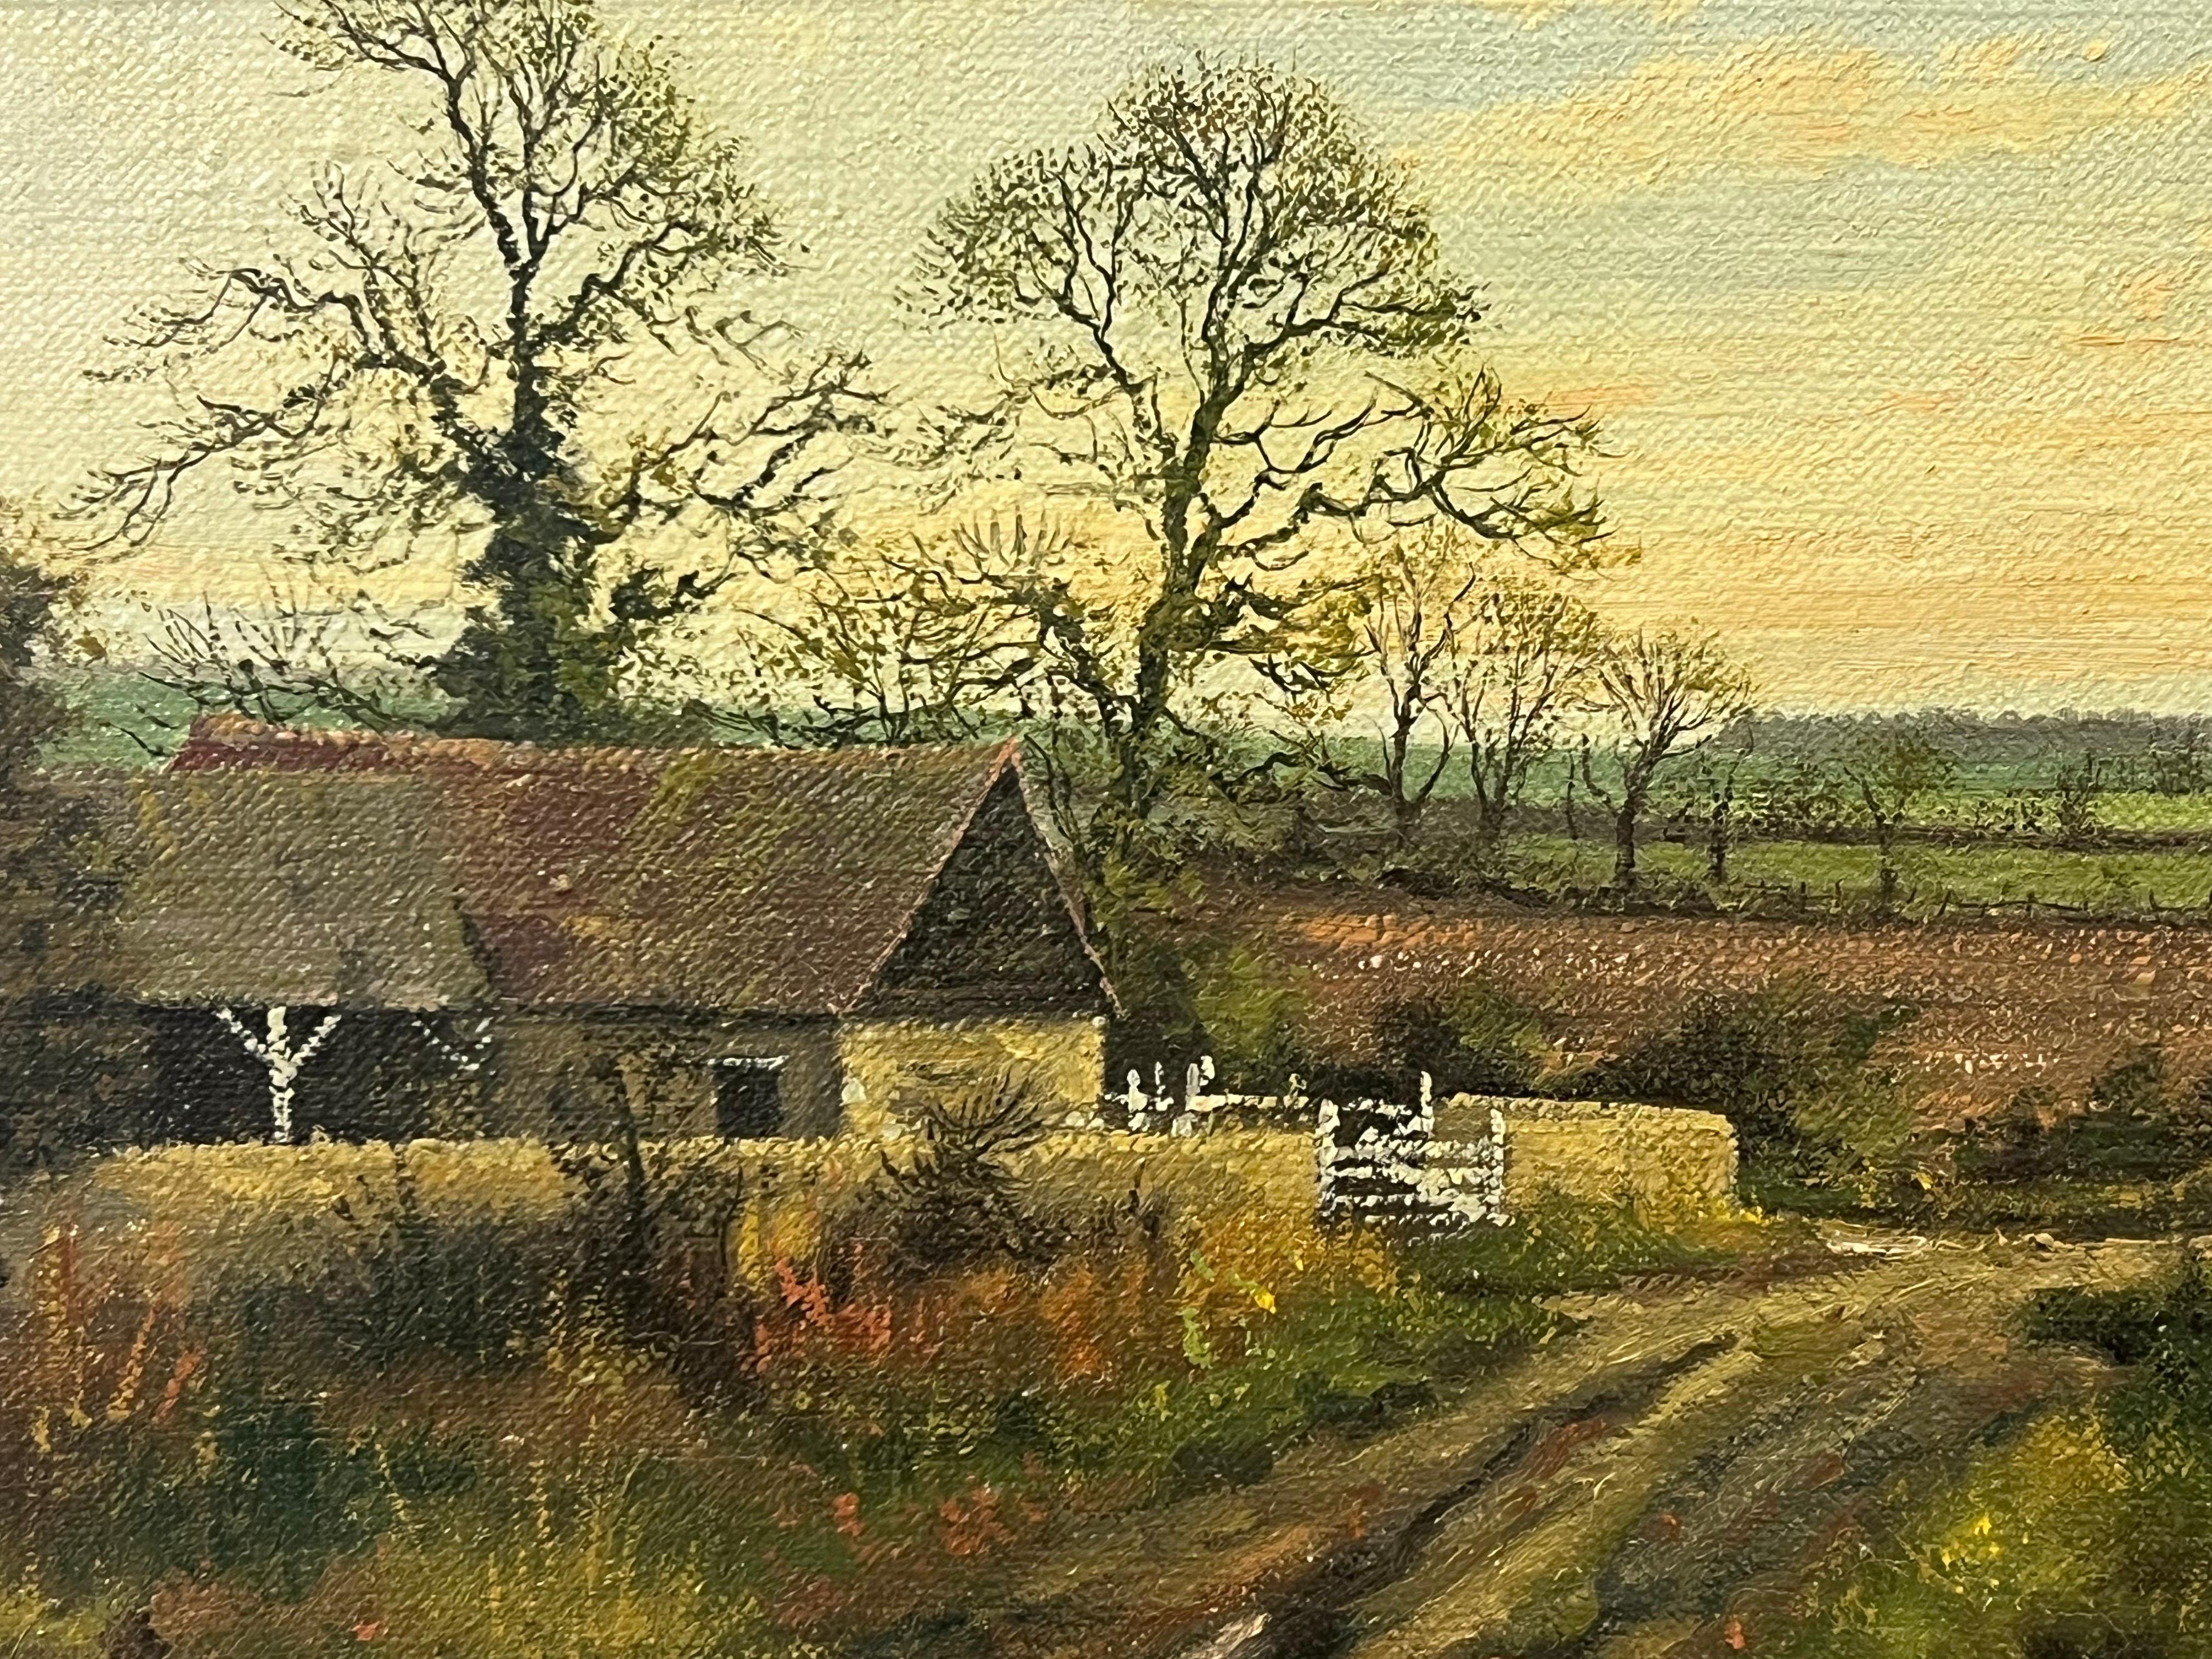 Old Barn Scene of a Farm in the English Countryside by 20th Century British Landscape Artist, James Wright.

Signed, vintage original, oil on heavy grain linen, reframed in a high quality natural solid oak moulding with a white insert. 

Art